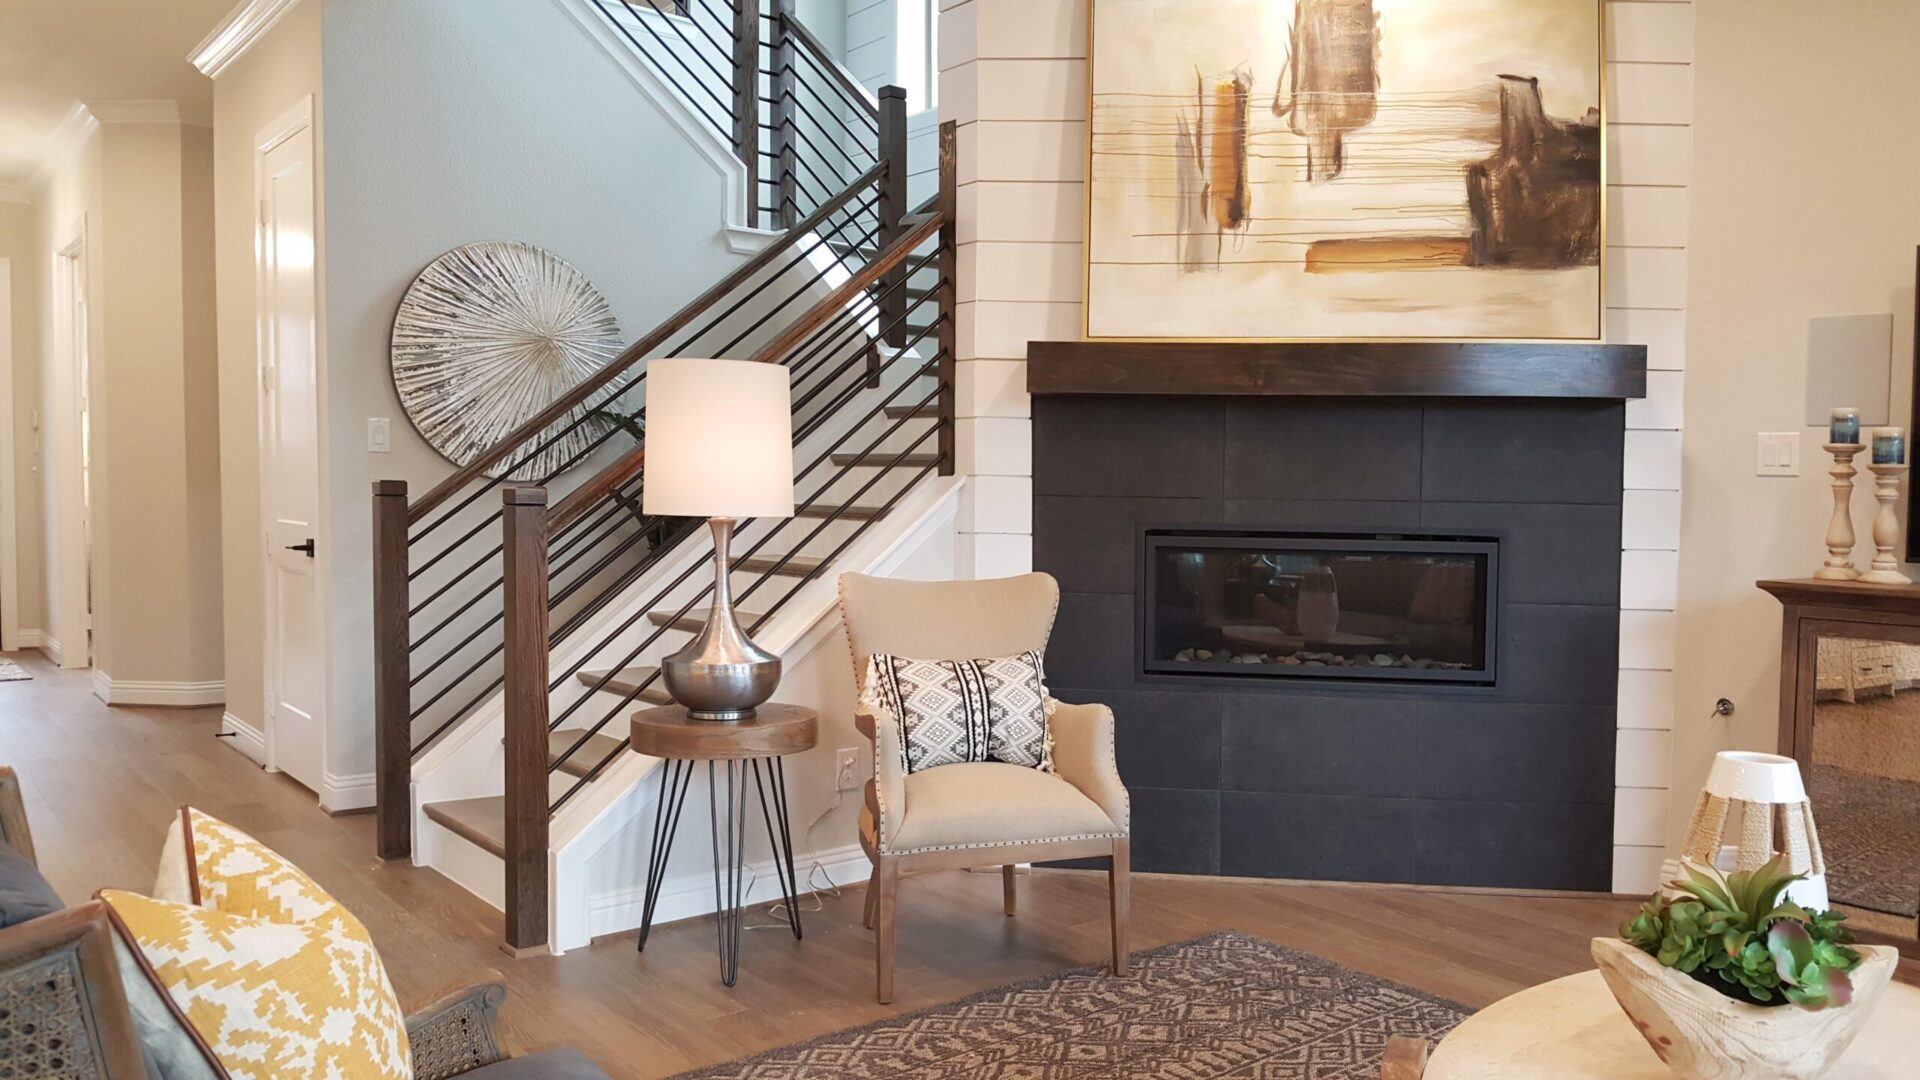 A living room with a fireplace and stairway.